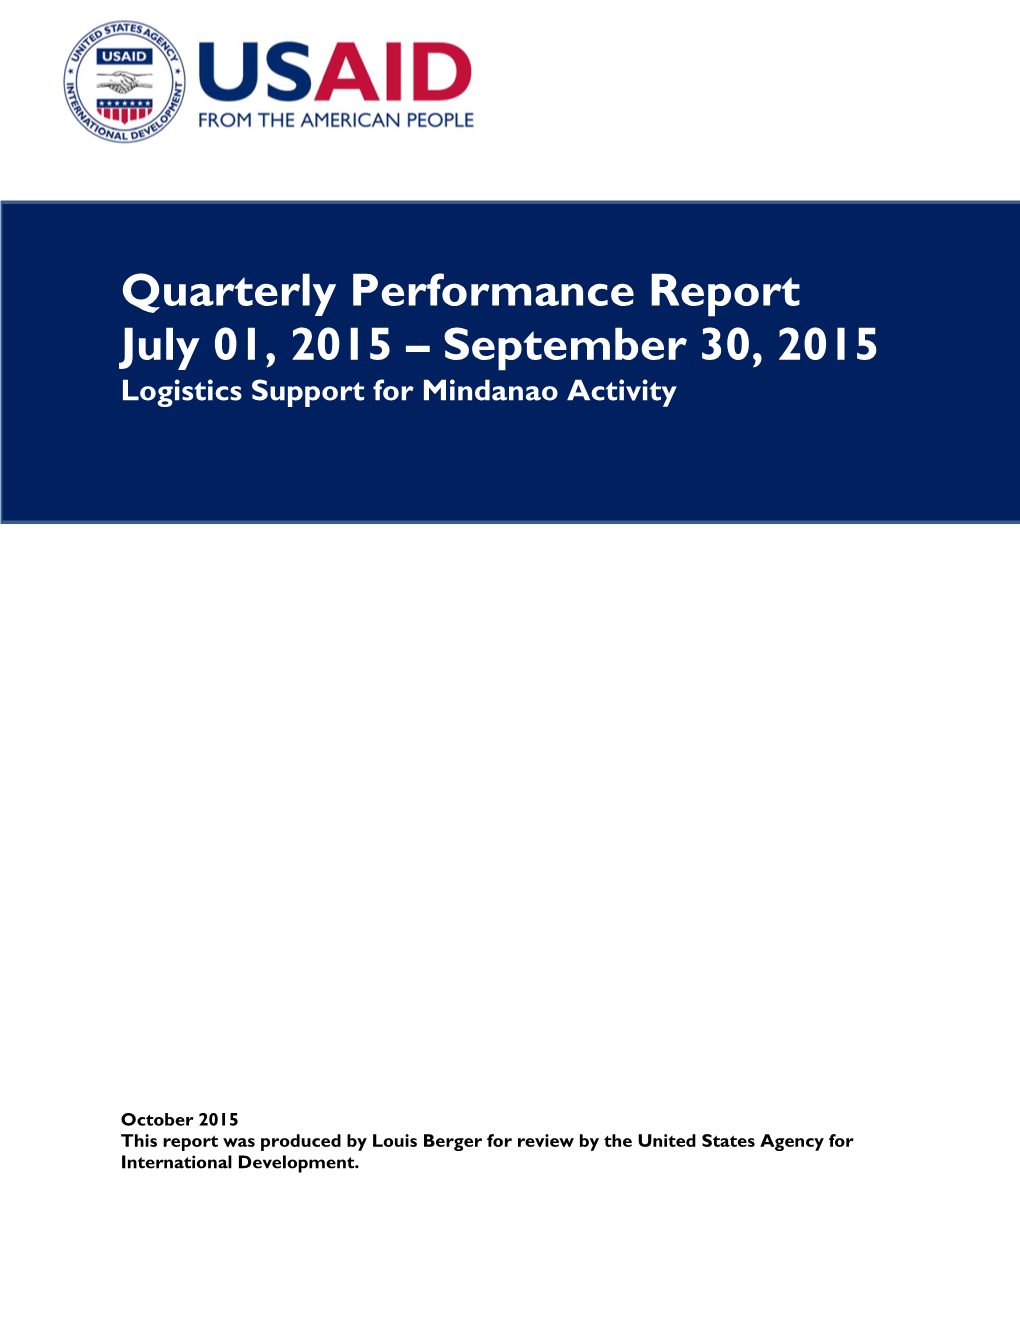 Quarterly Performance Report July 01, 2015 – September 30, 2015 Logistics Support for Mindanao Activity